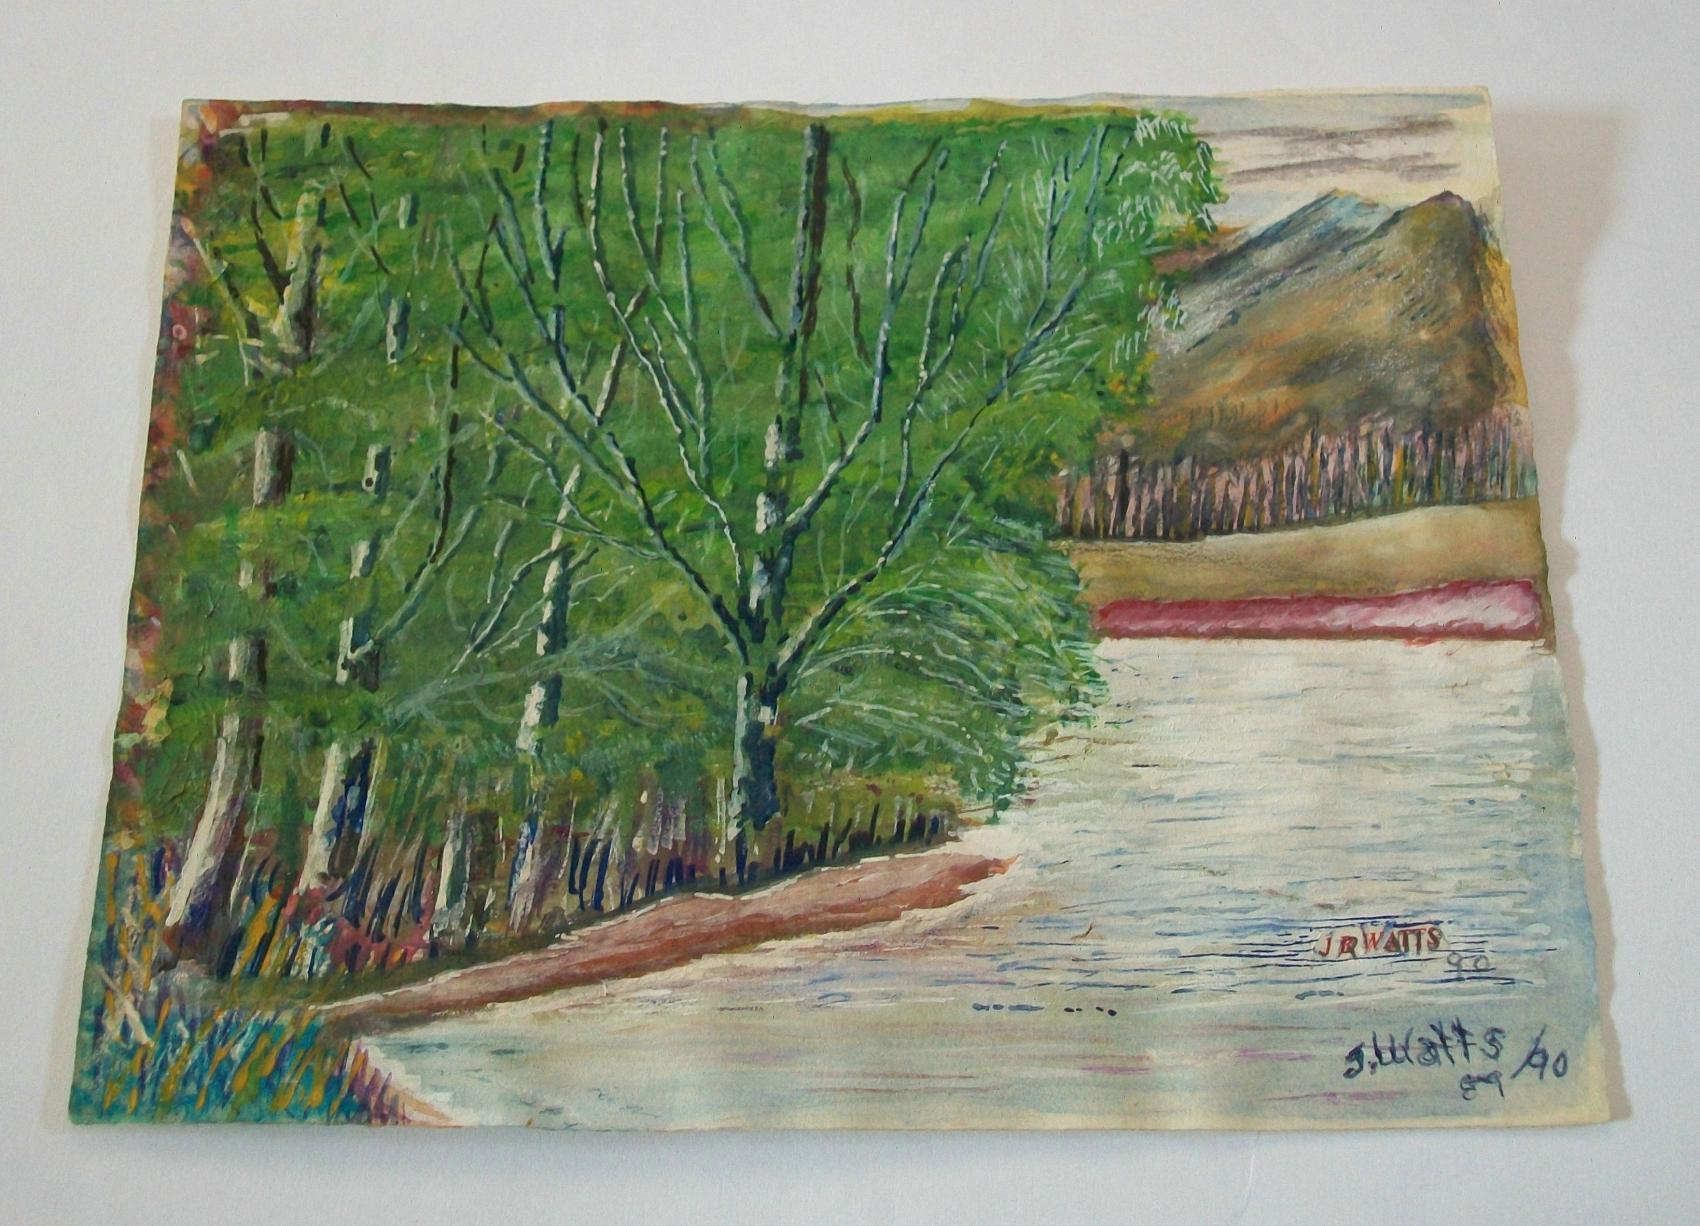 JOHN R. WATTS, Folk Art Watercolor & Gouache Landscape Painting, U.S., C.1890 In Good Condition For Sale In Chatham, ON